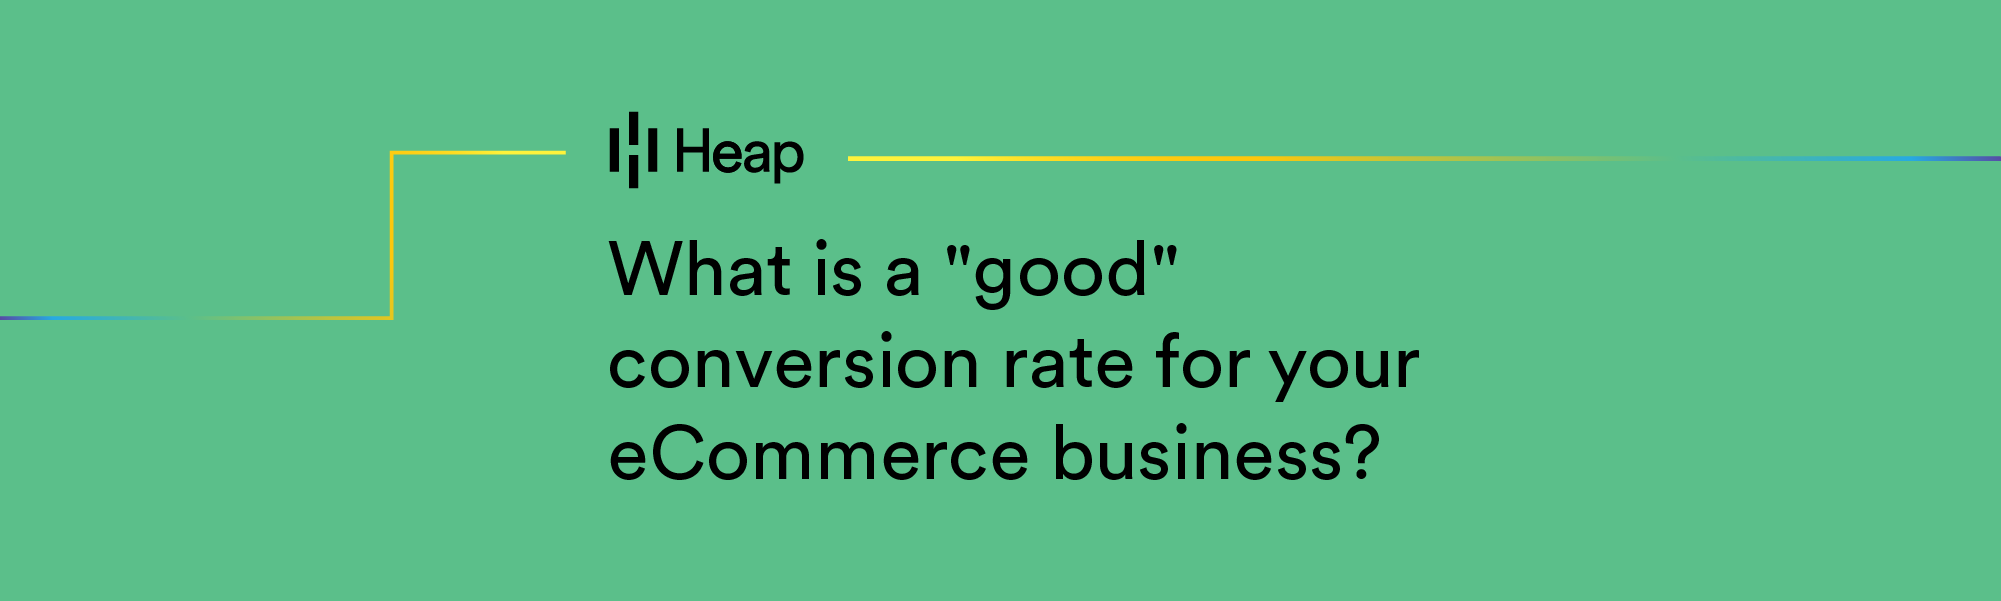 What is a "good" conversion rate for your eCommerce business?